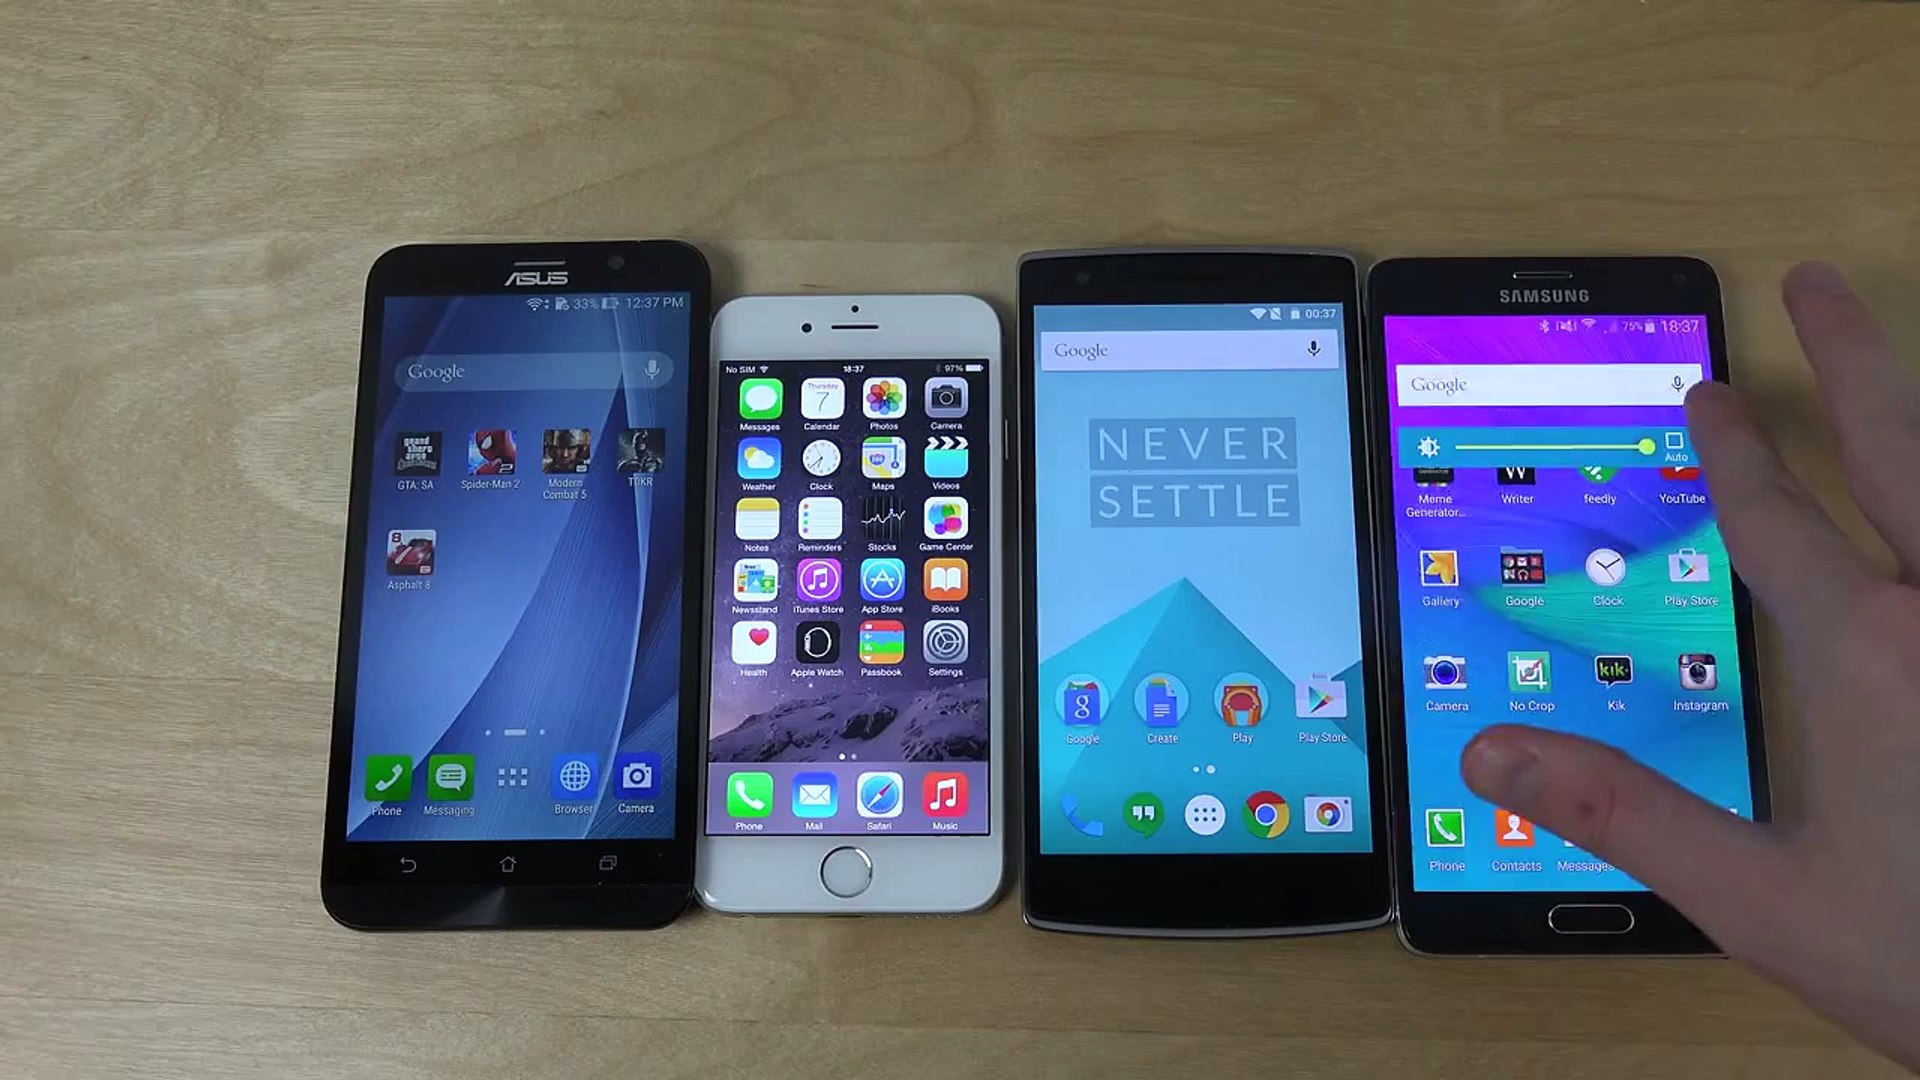 ASUS ZenFone 2 vs. iPhone 6 vs. Samsung Galaxy Note 4 vs. OnePlus One -  Which Is Faster? - video Dailymotion